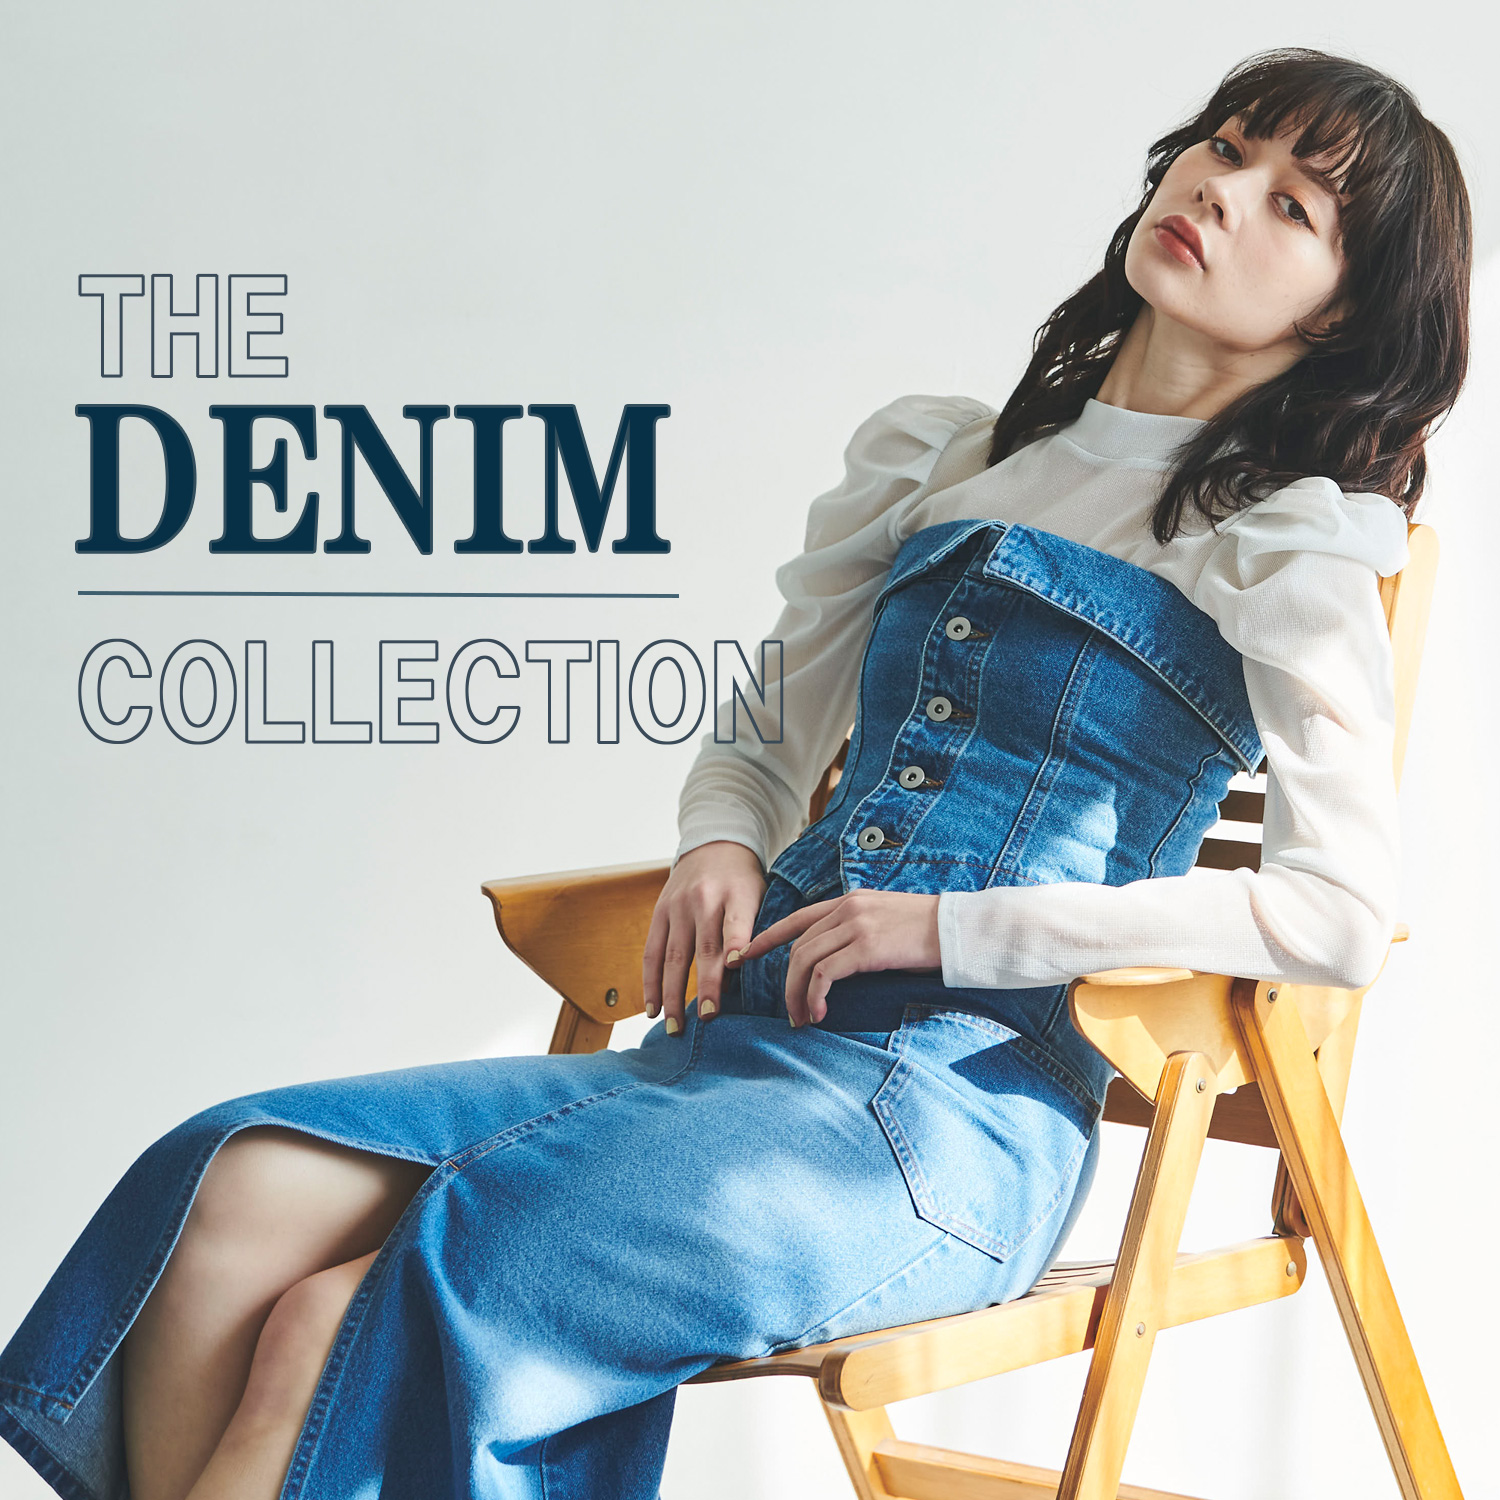 TheDenimCollection